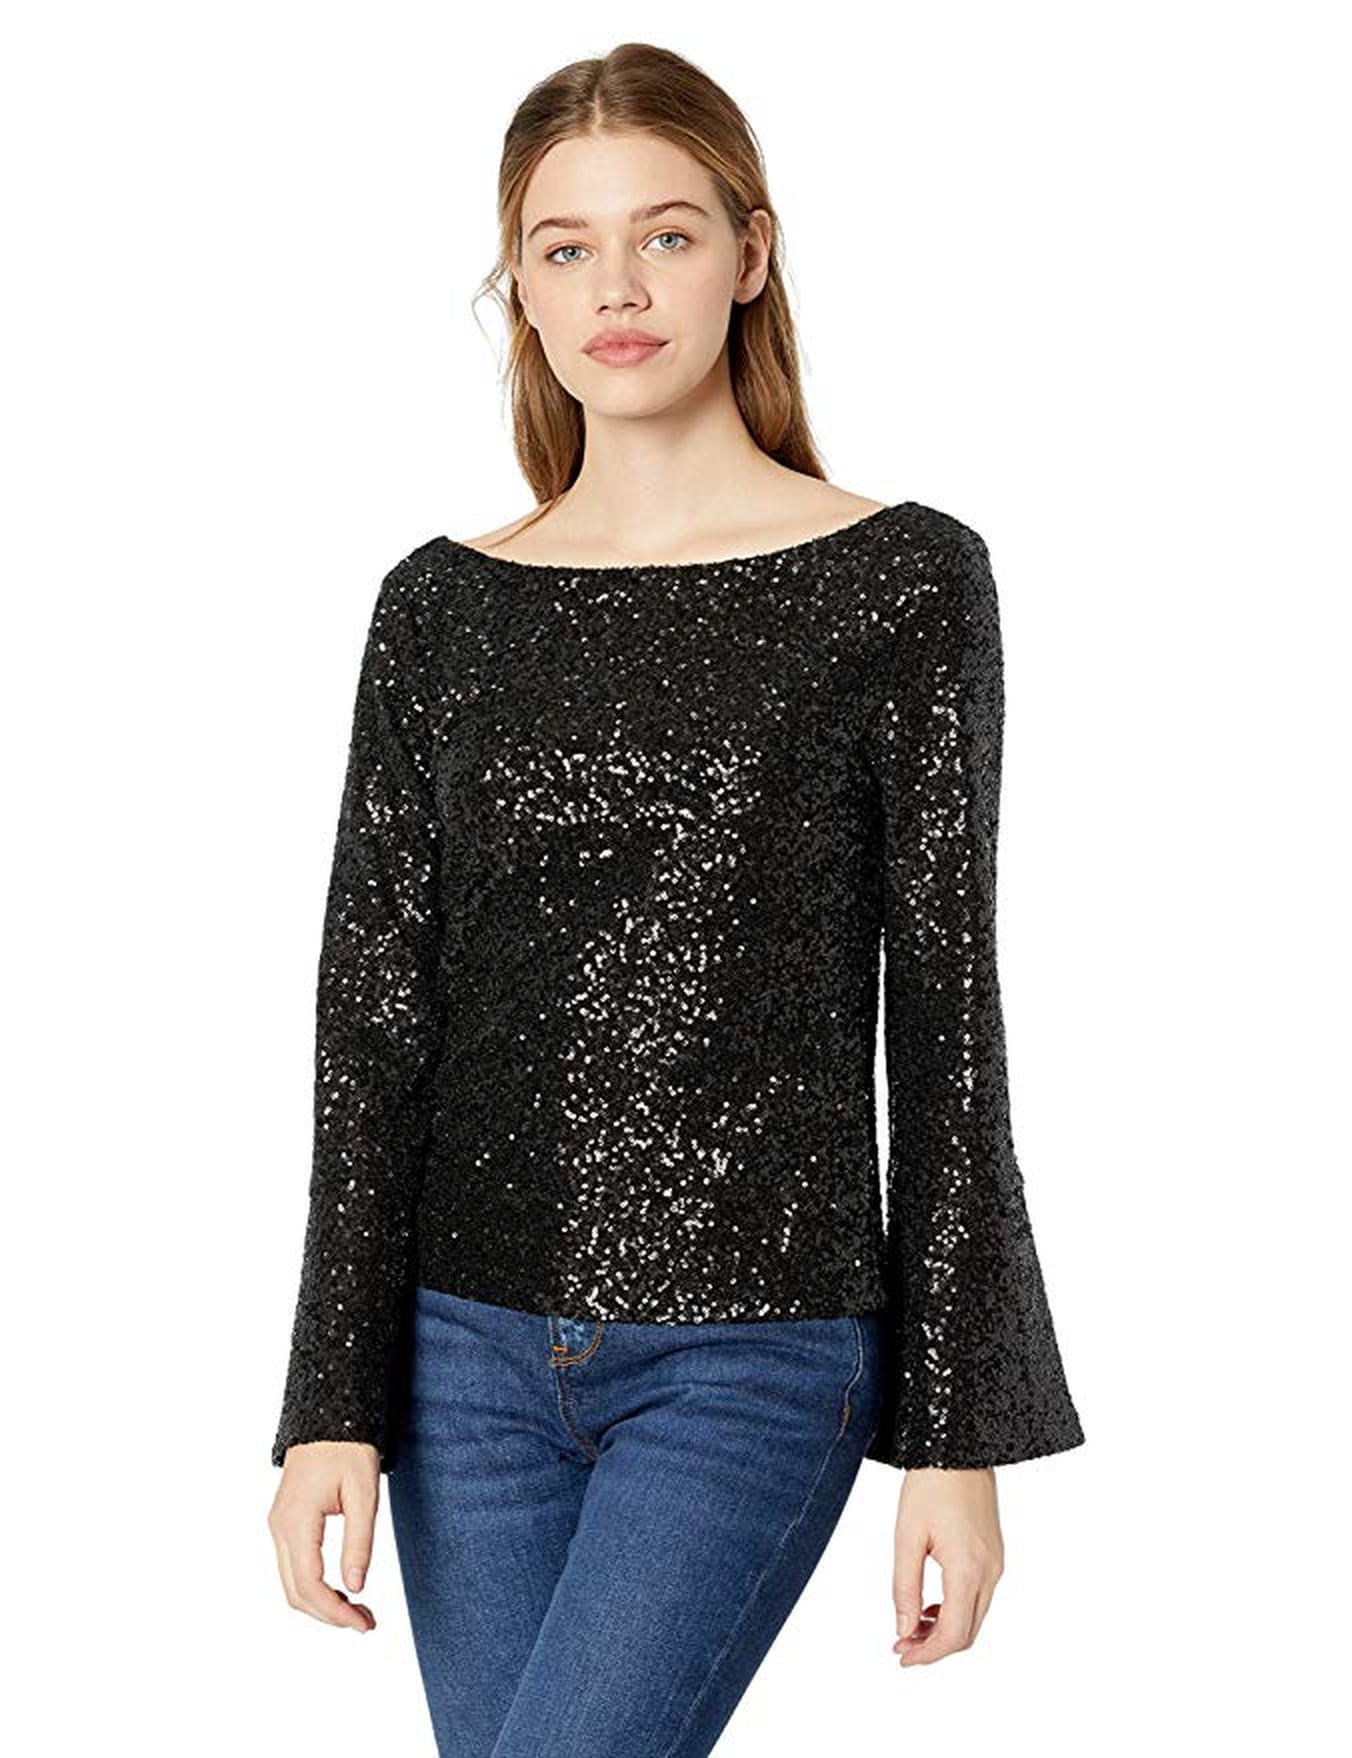 Best Sequin Tops on Amazon For All Your Holiday Parties | POPSUGAR Fashion